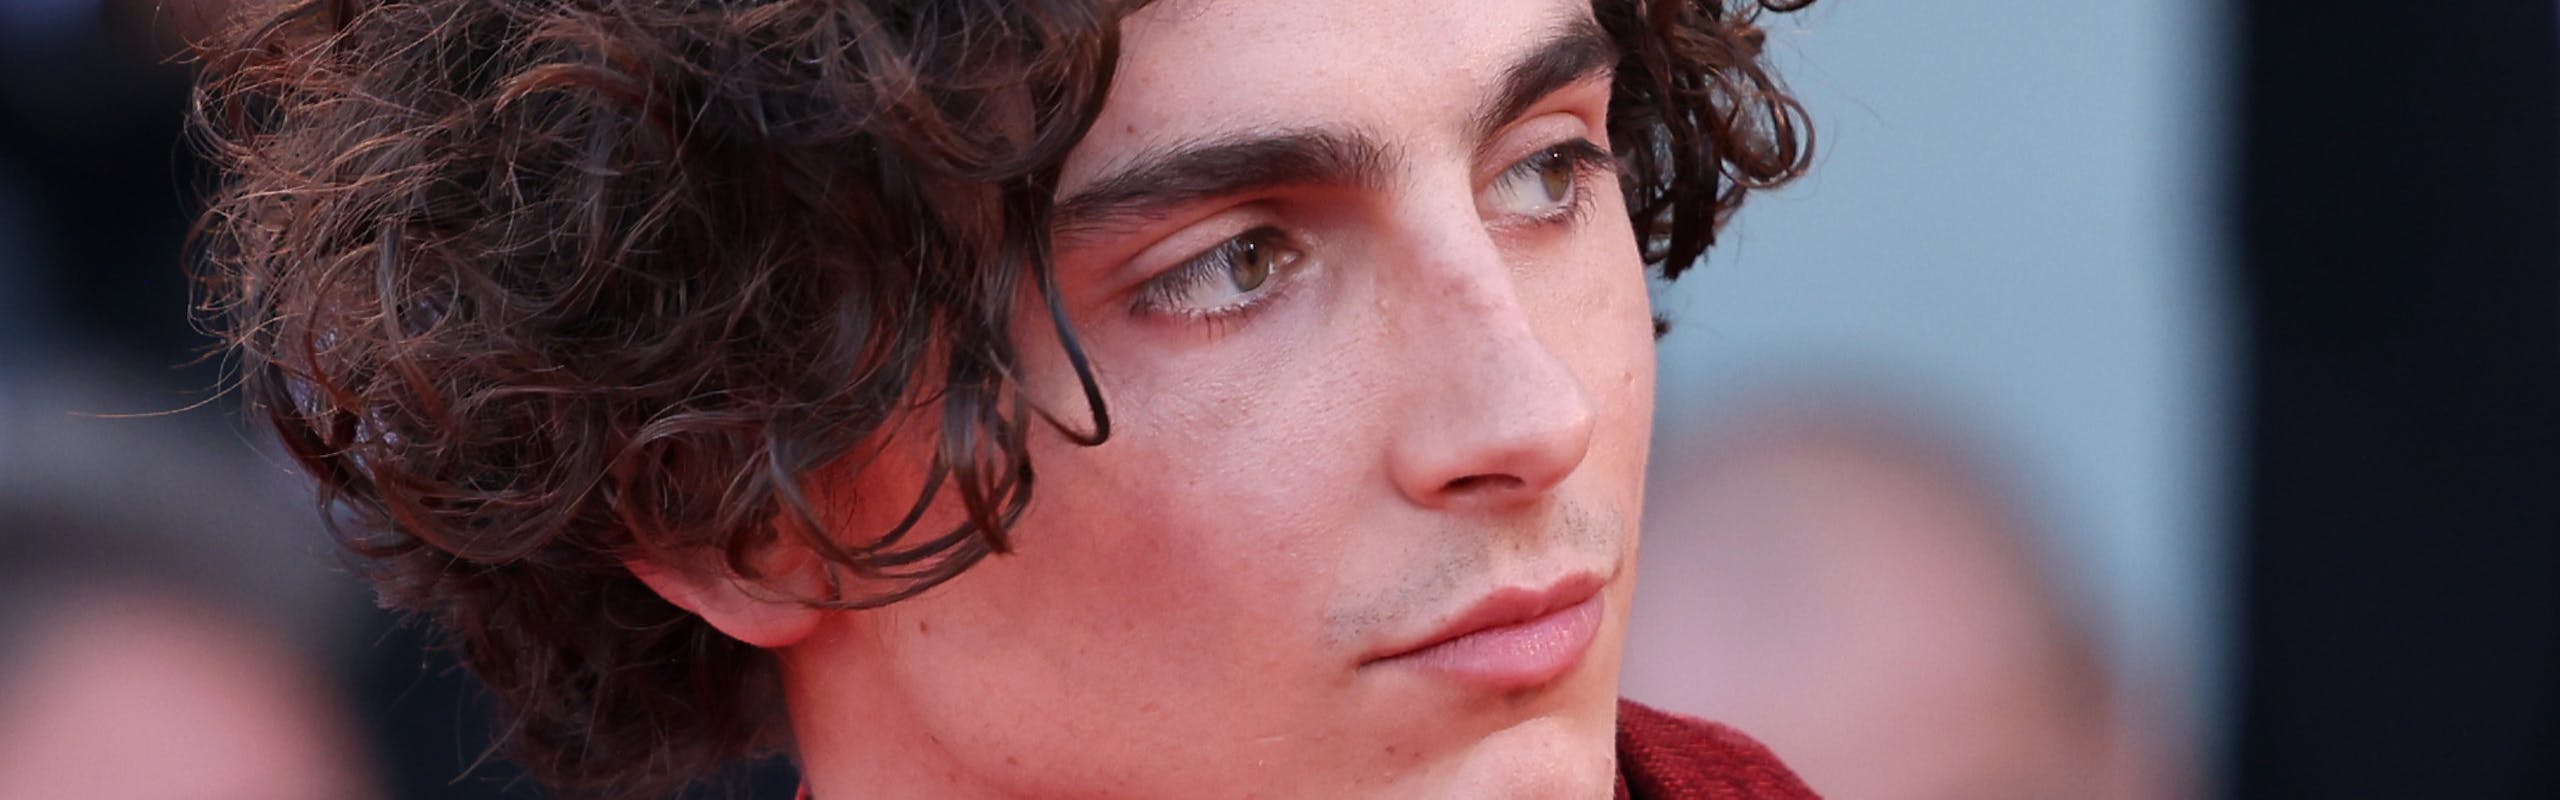 Timothée Chalamet photo by Getty Images